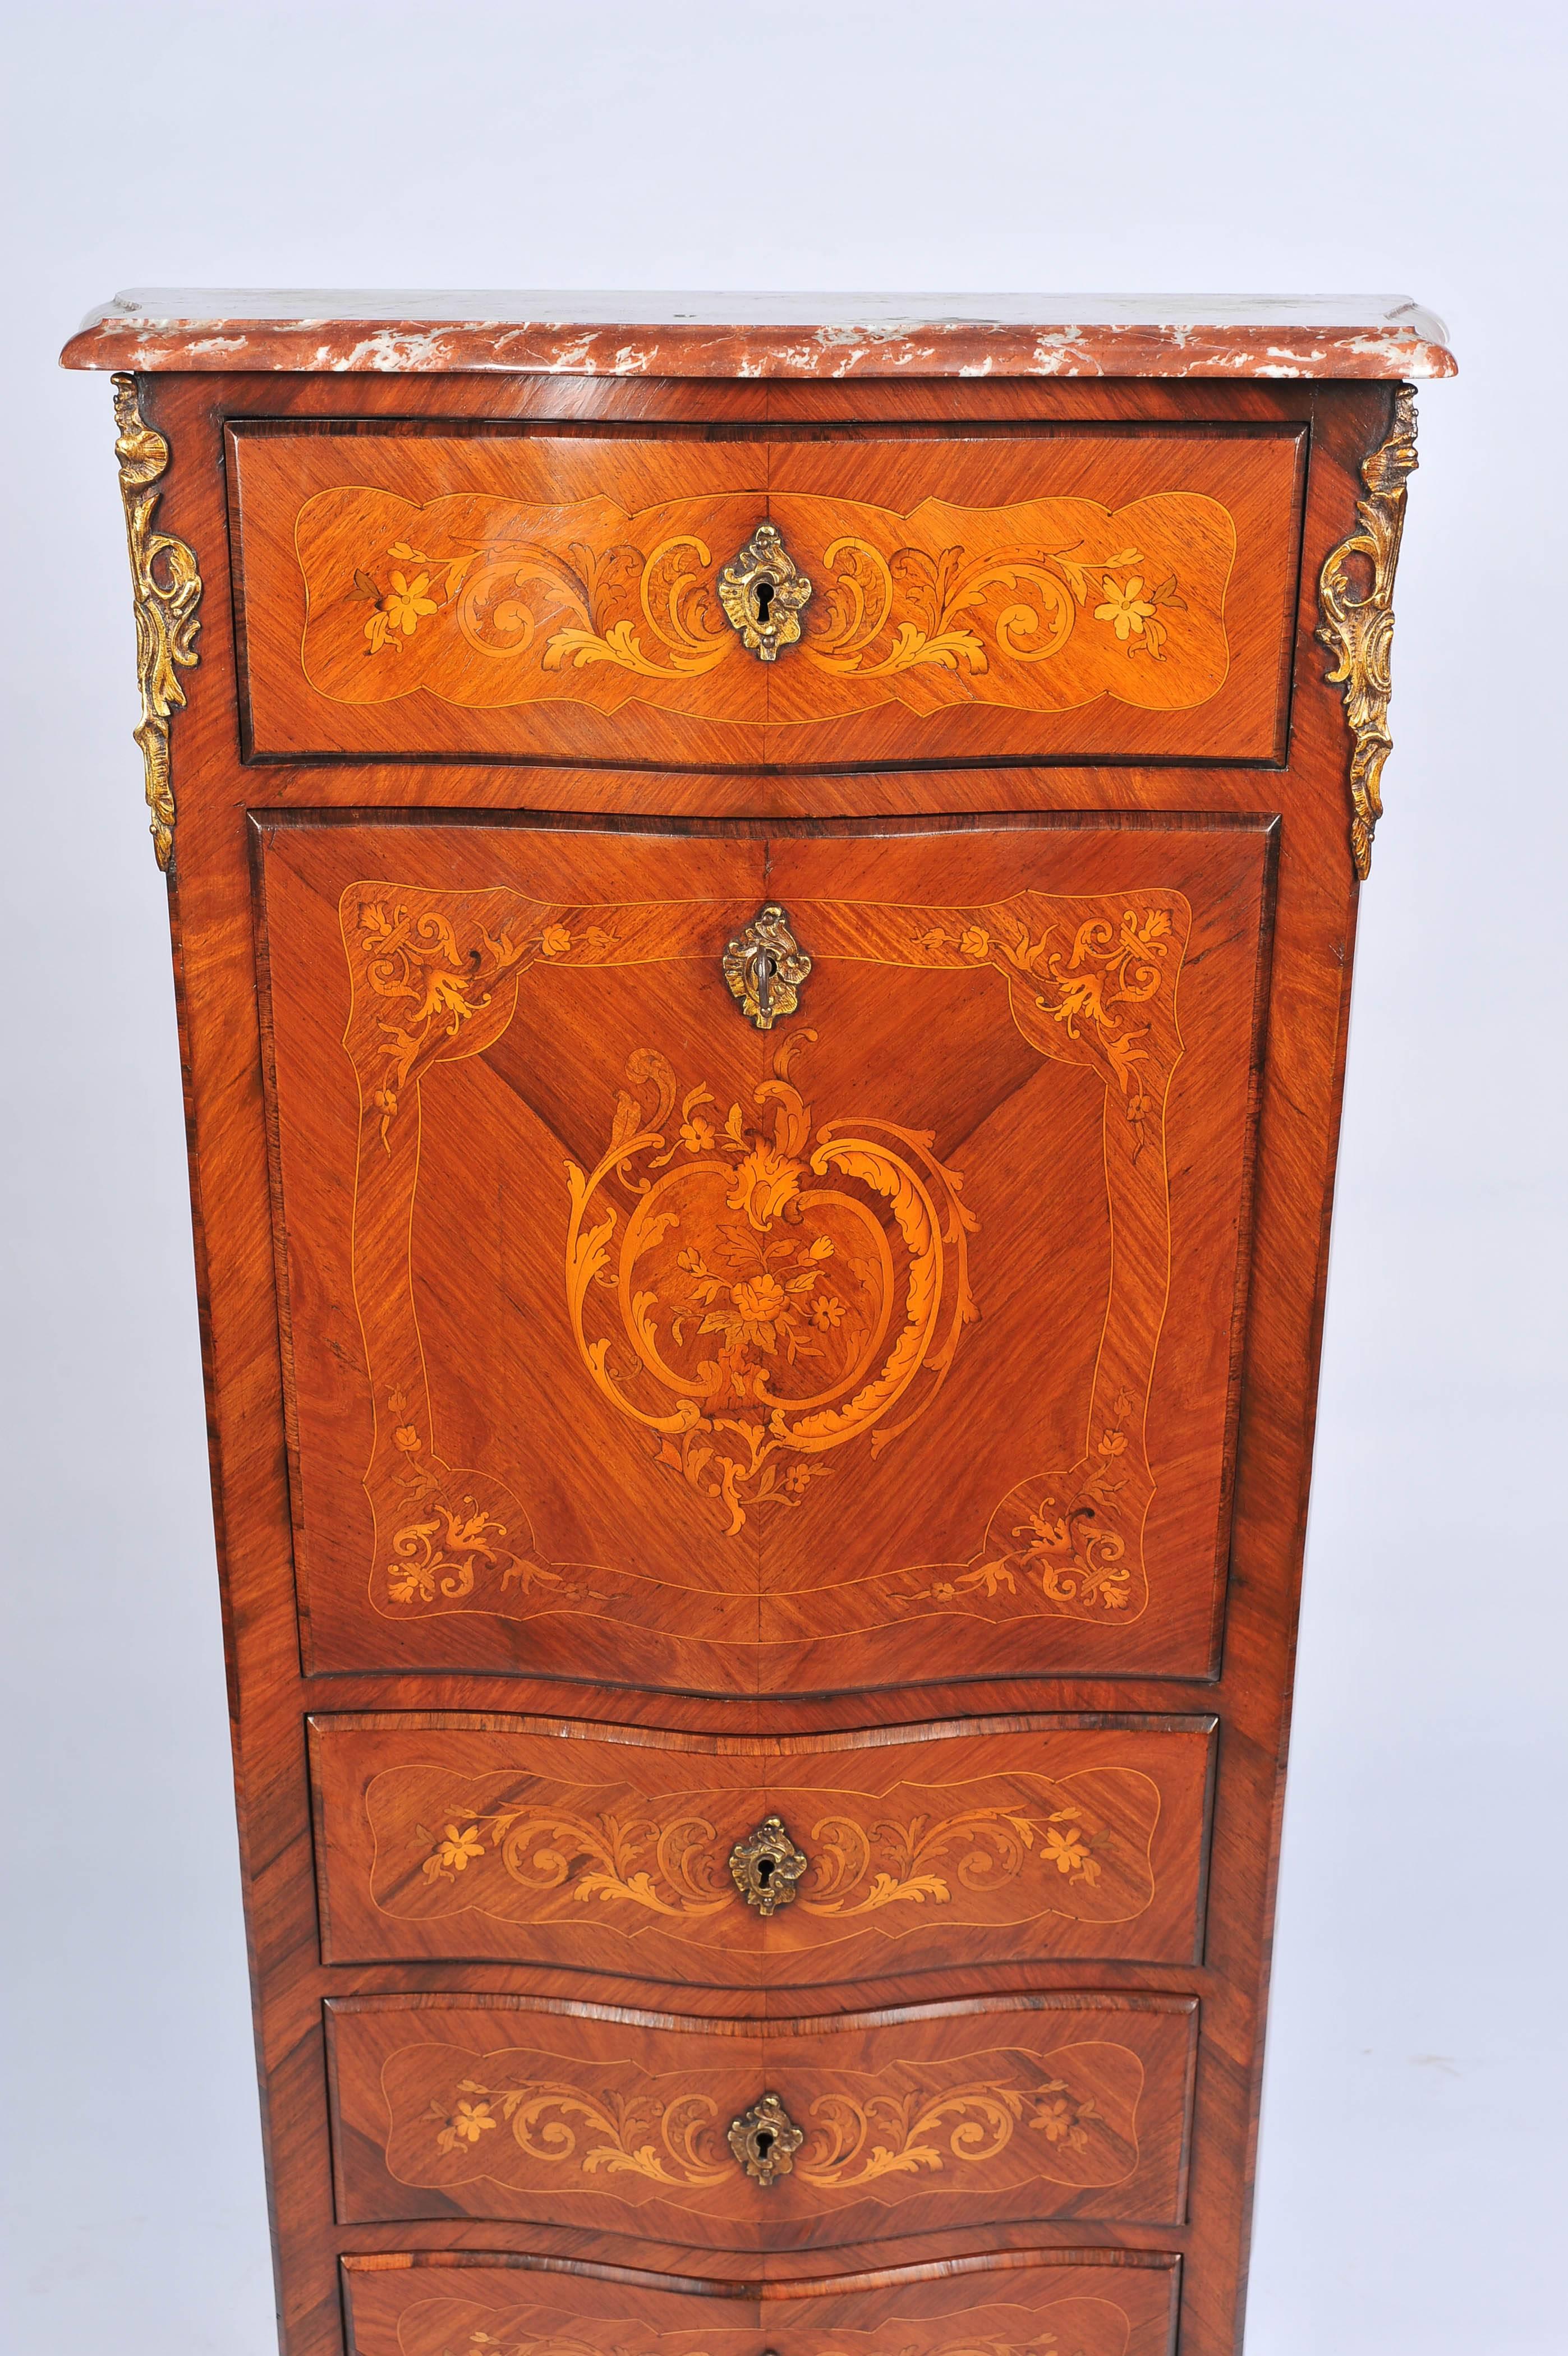 A good quality late 19th century, French, Louis XVI style secretaire abattant.